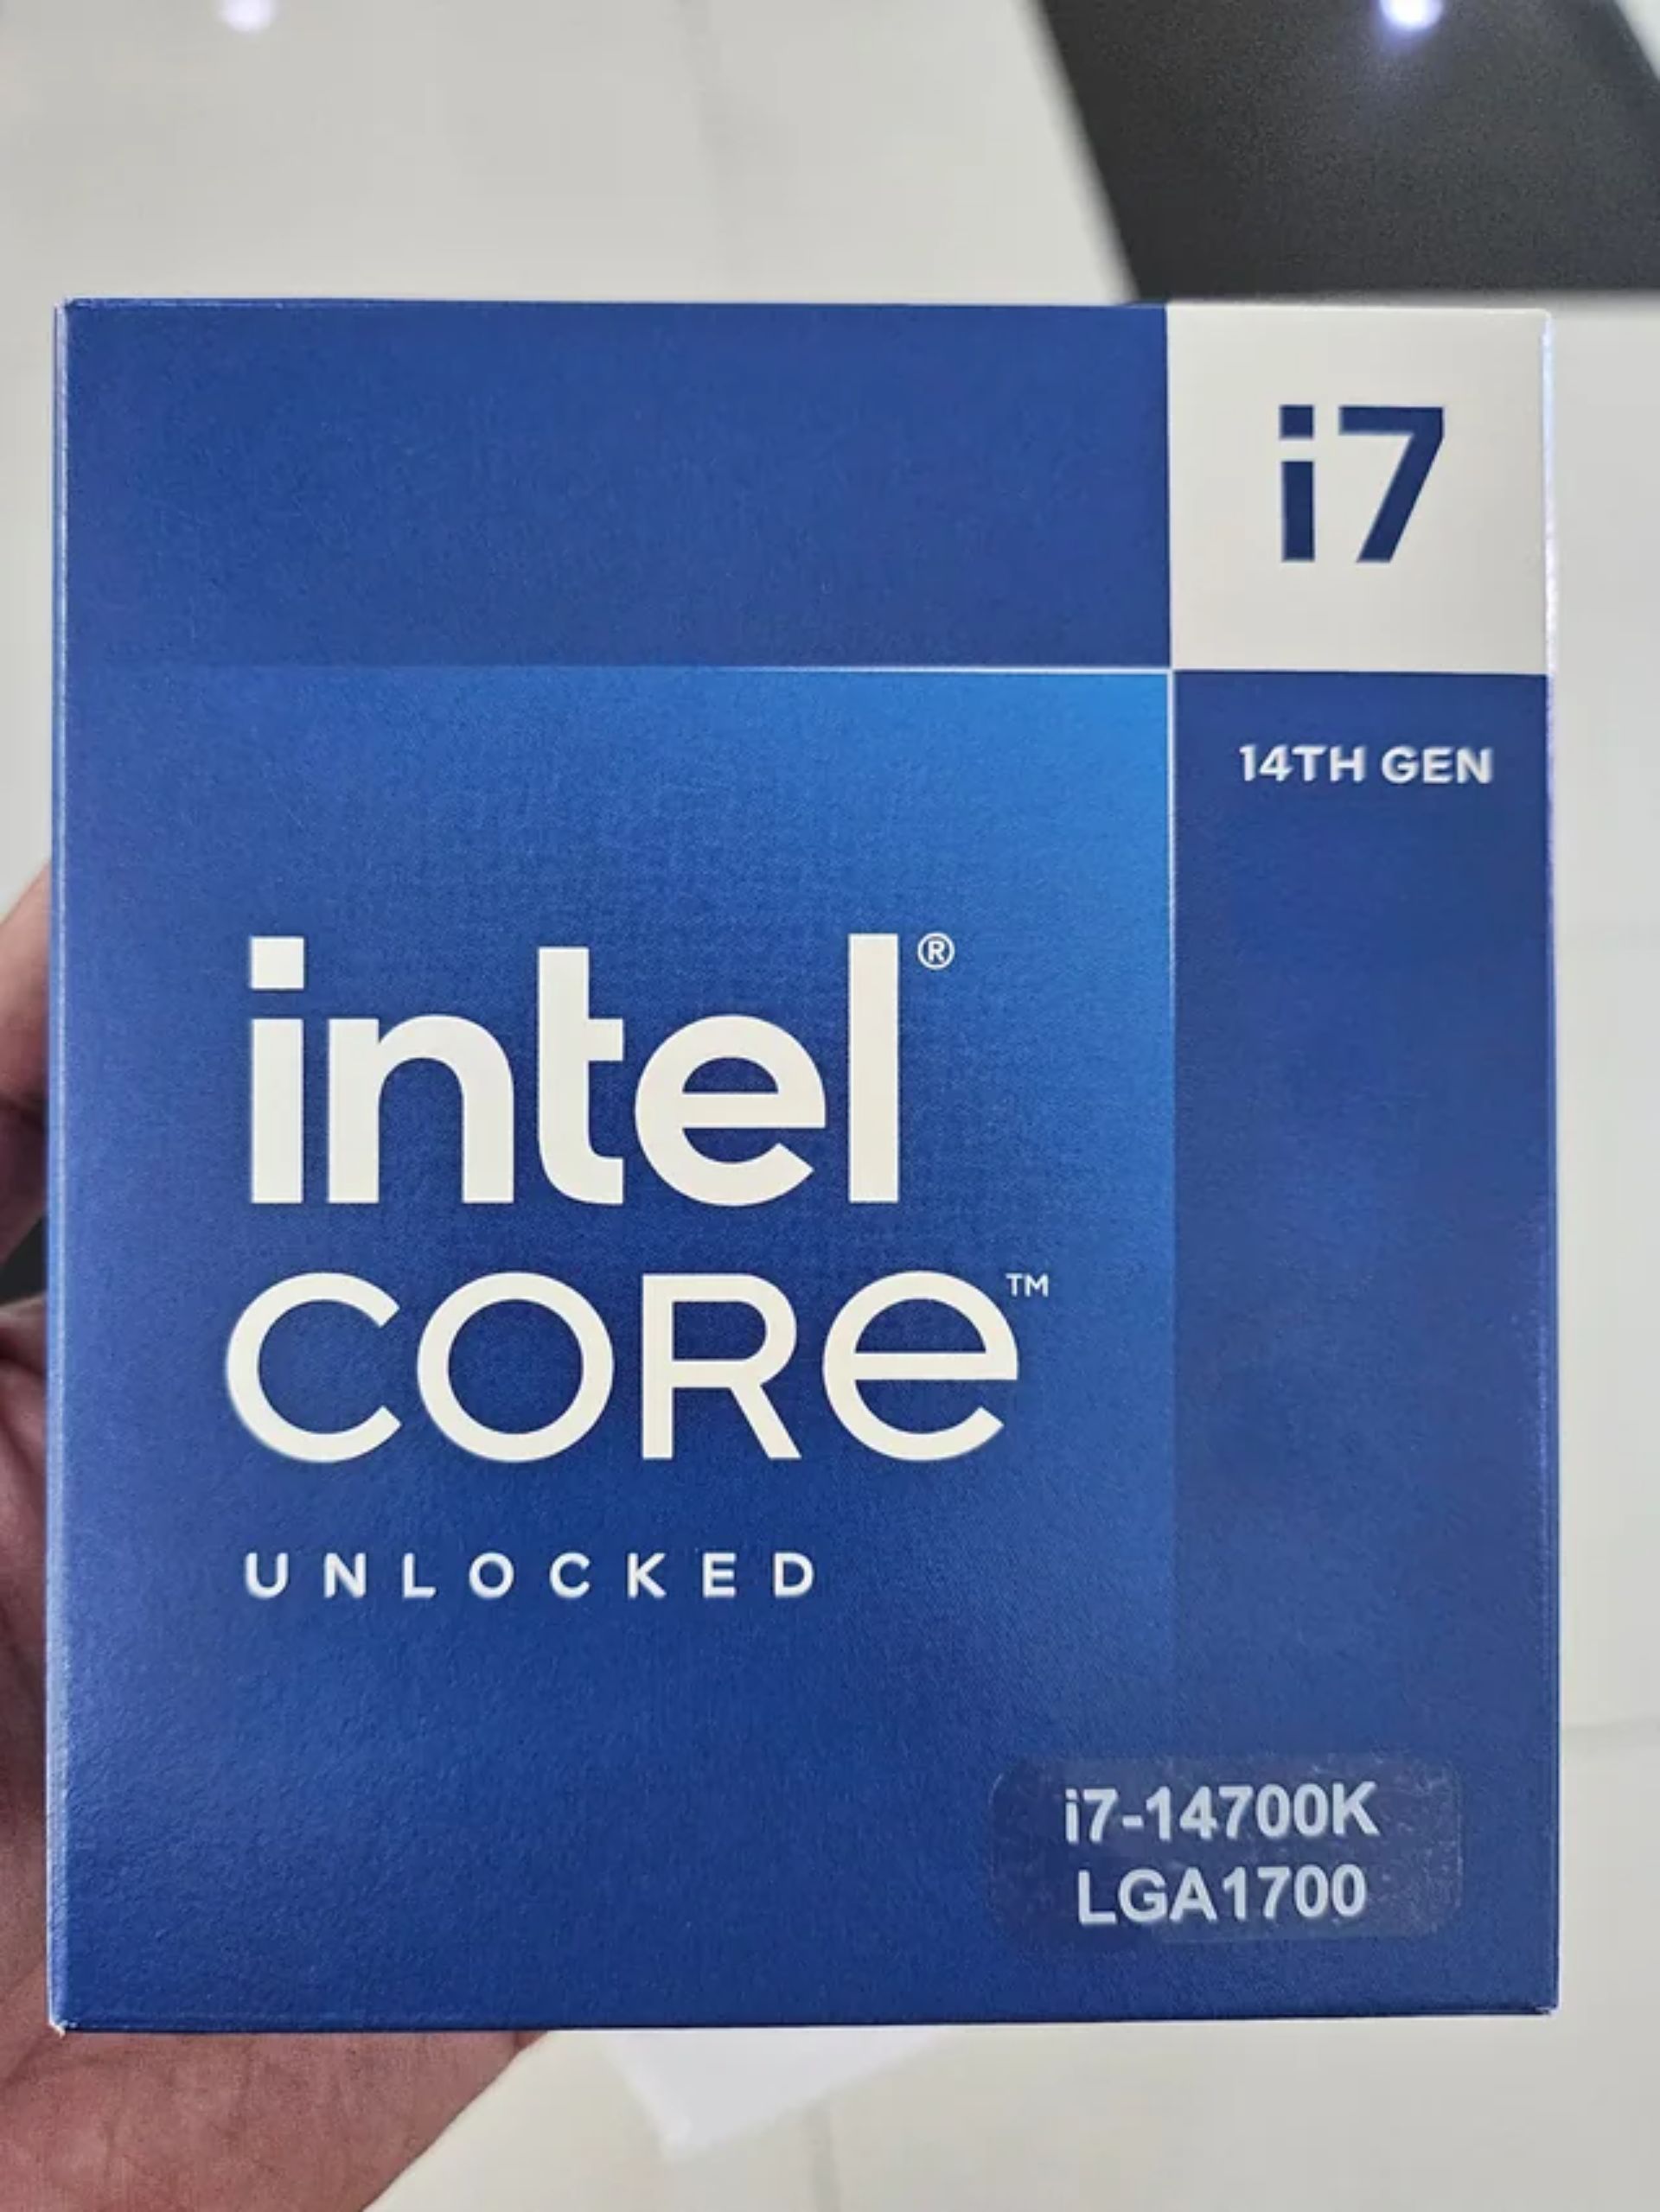 Intel's i7-14700K Already Being Sold In Indonesia Before Official